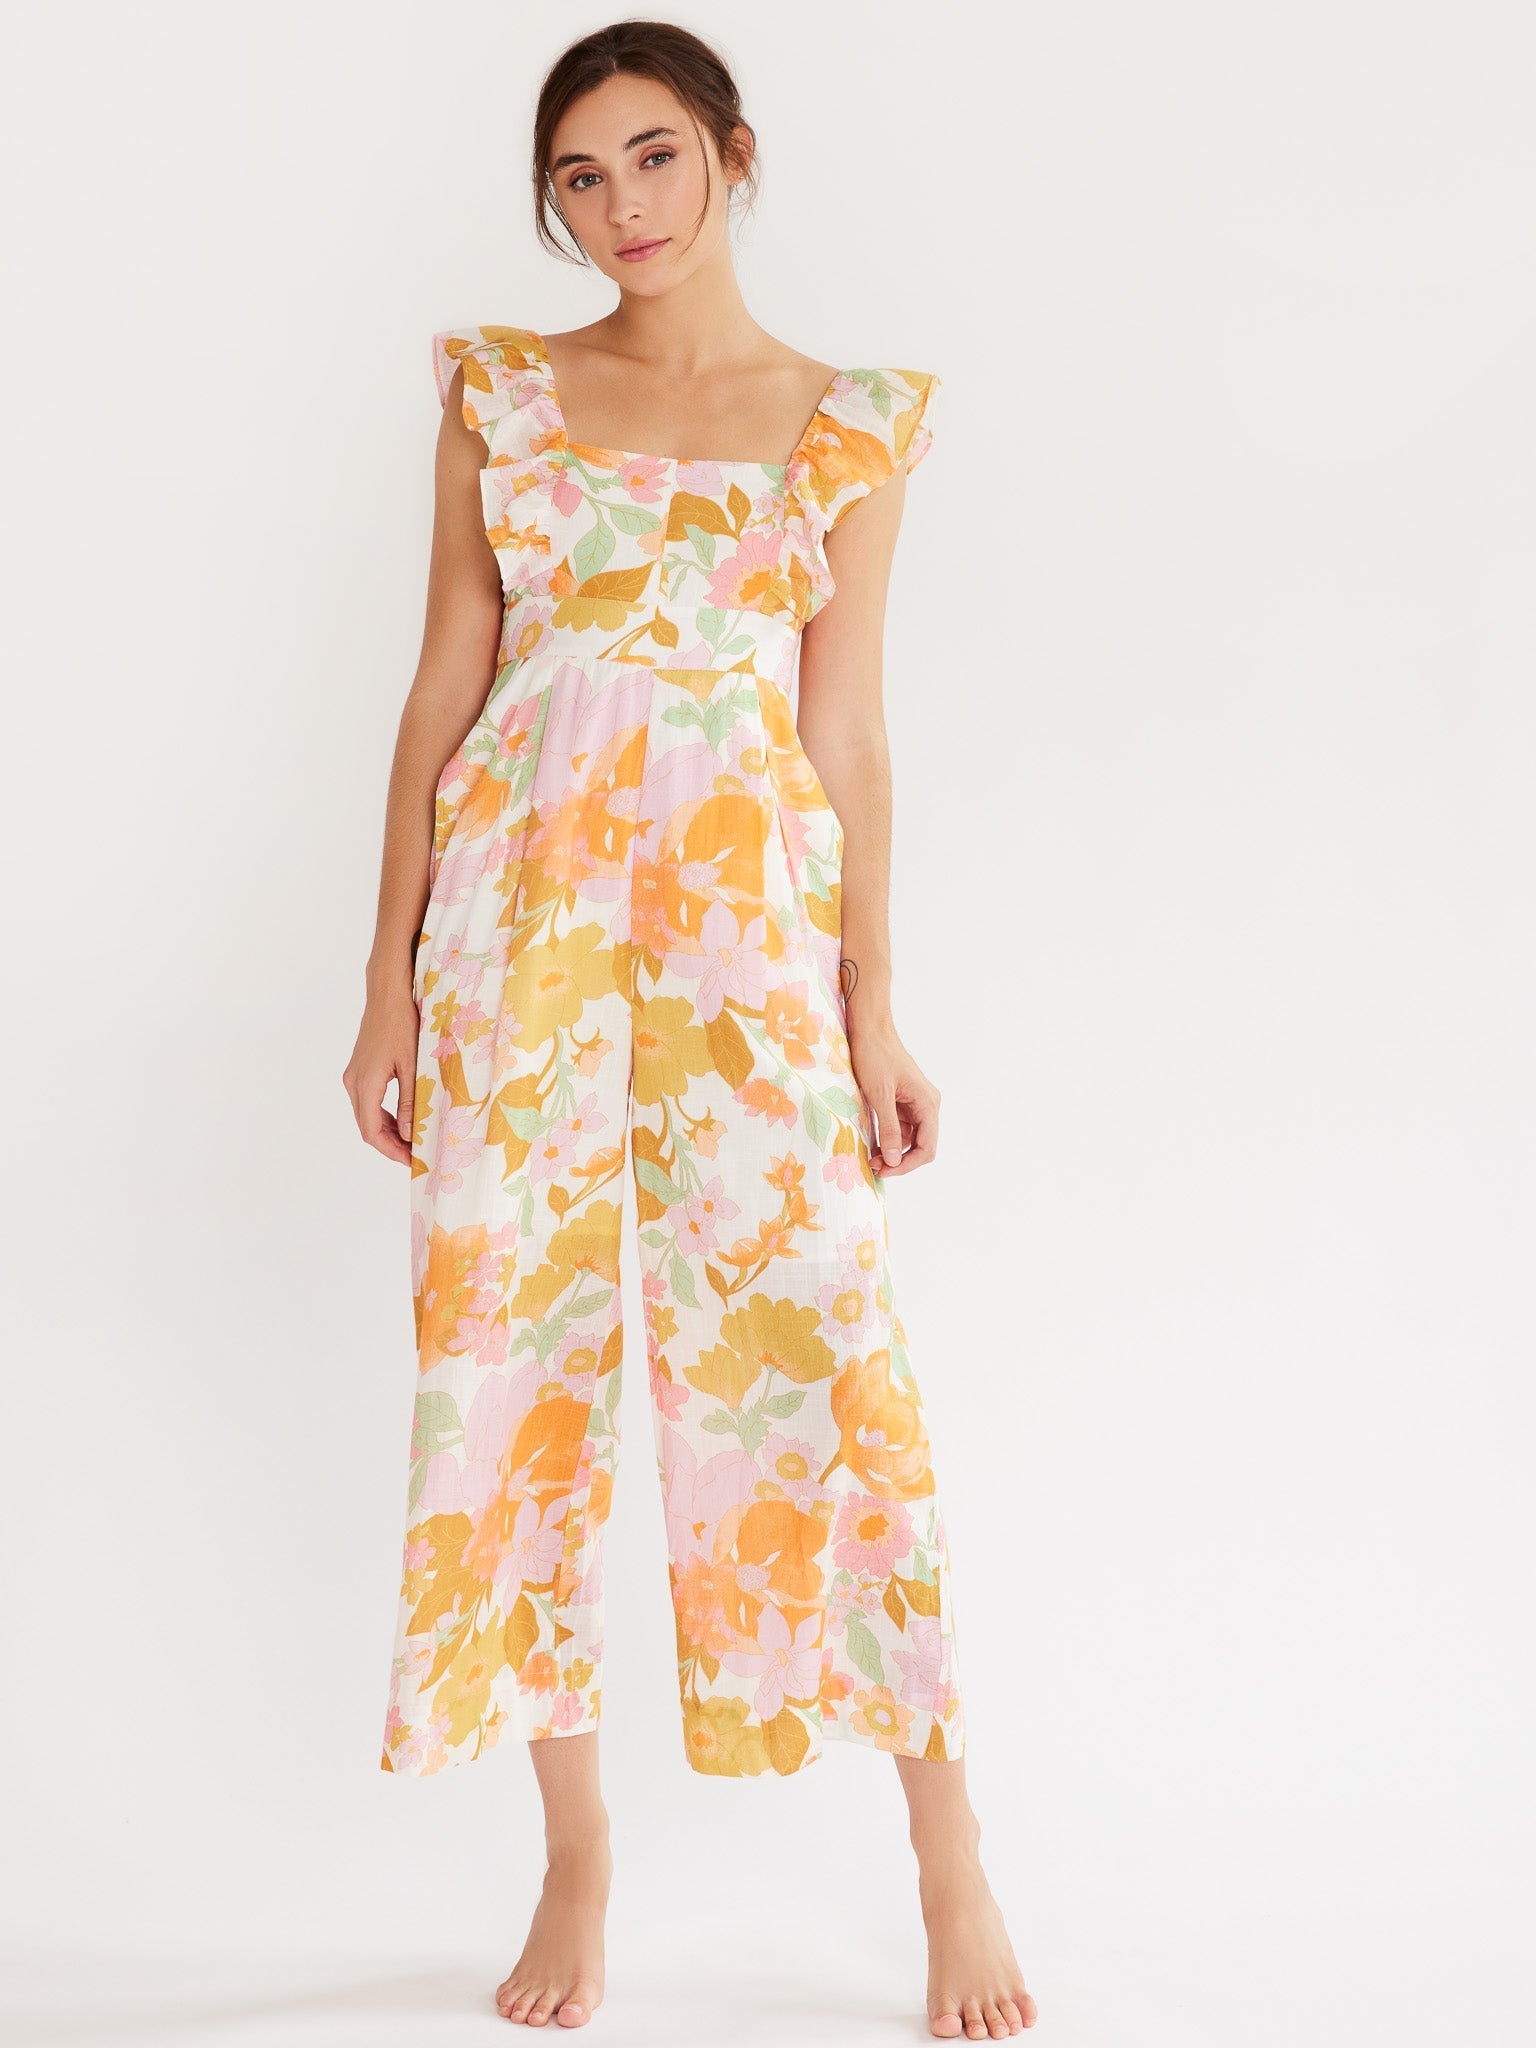 MILLE Clothing Alessia Jumpsuit in Harmony Floral